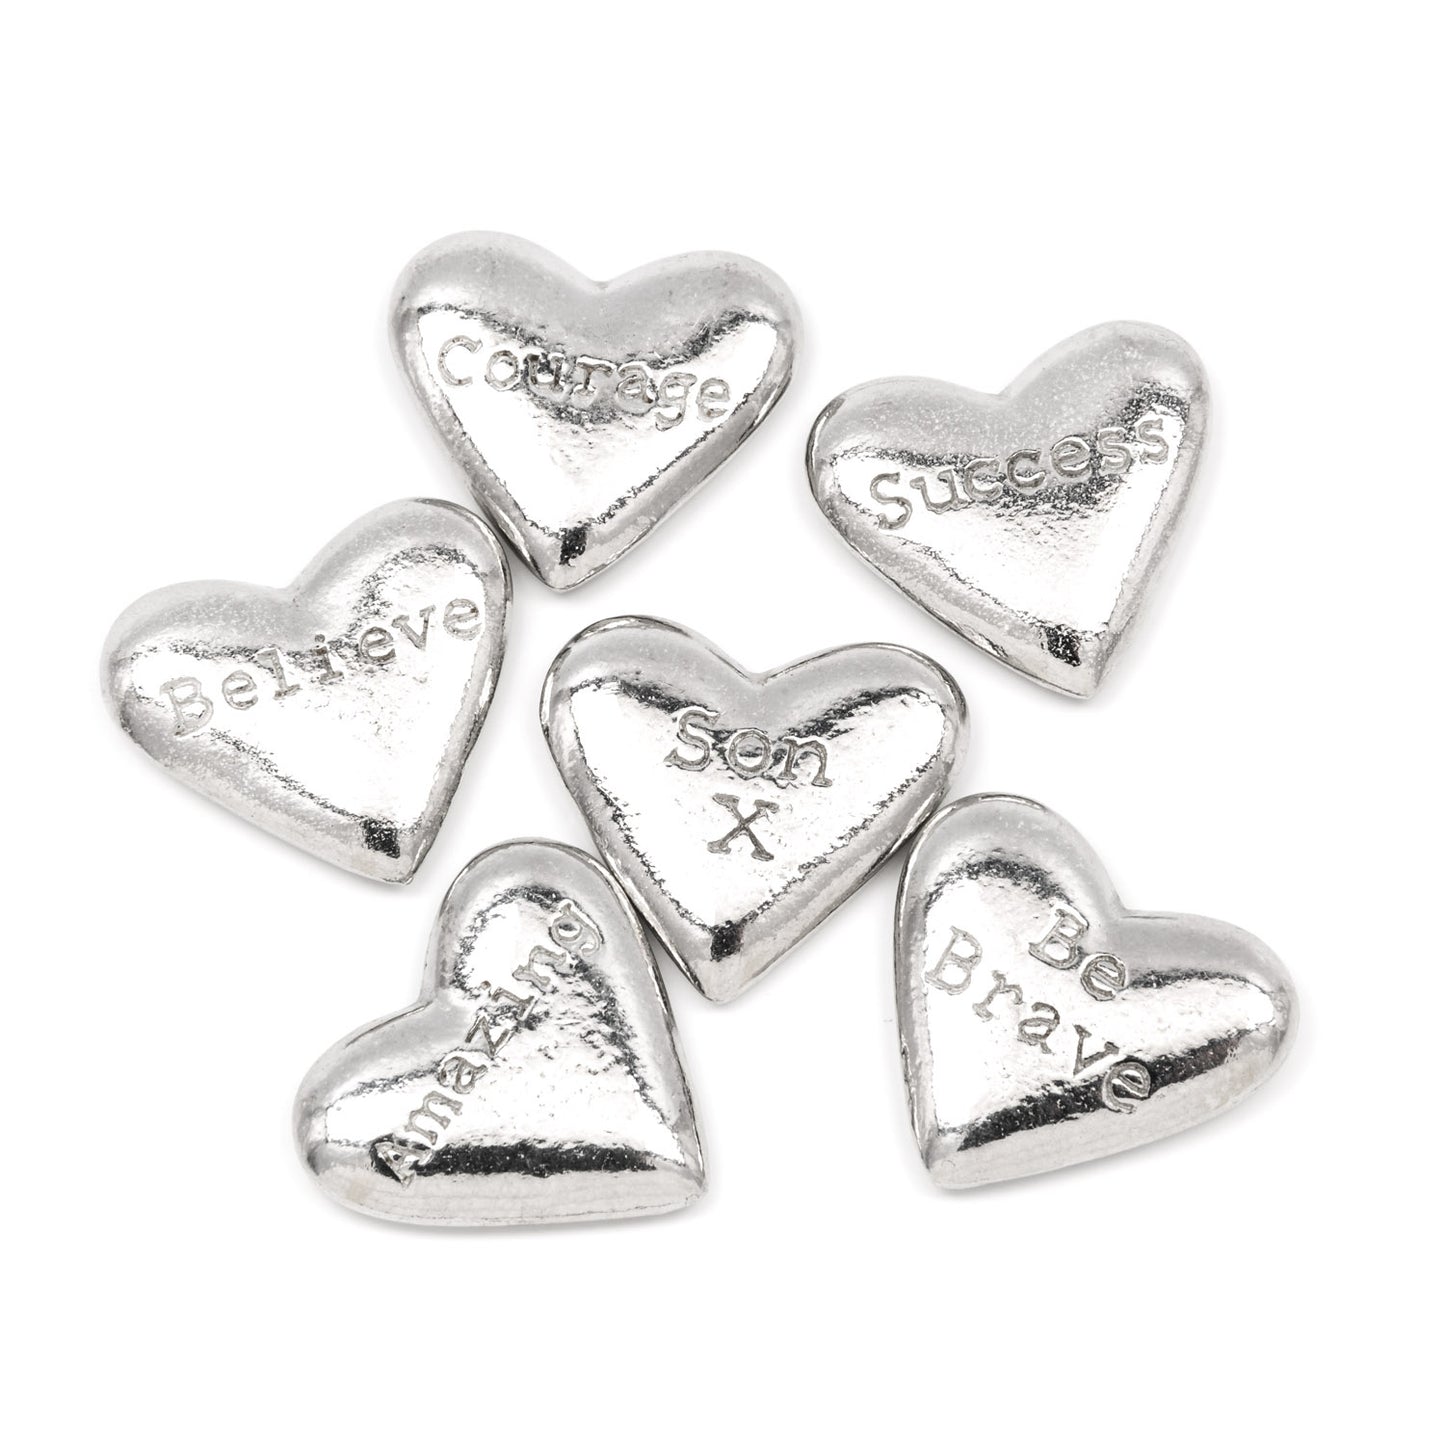 Courage heart pewter pocket pebble